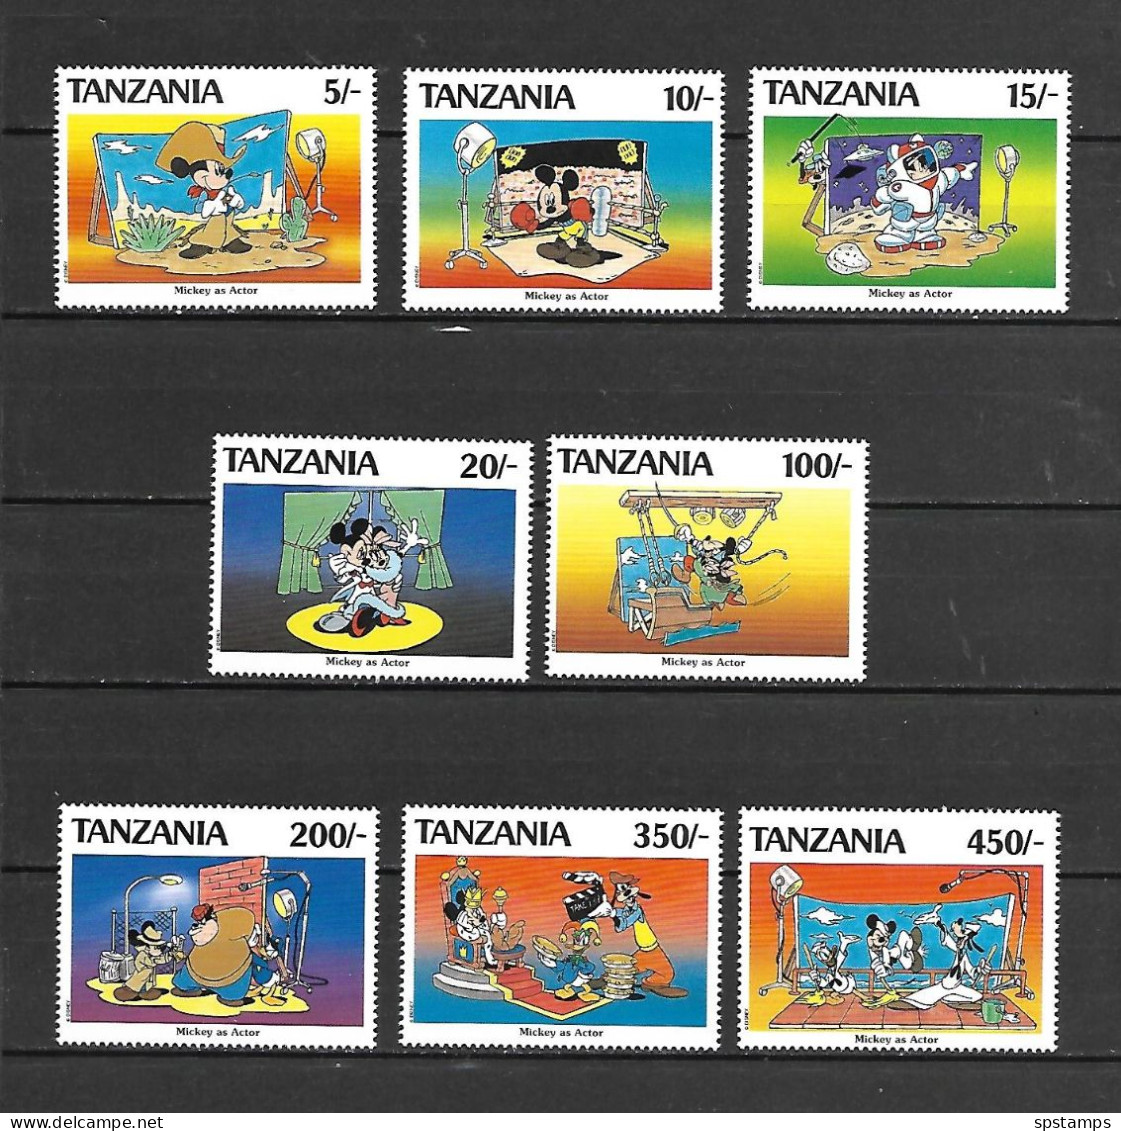 Disney Set Tanzania 1994 Mickey Mouse As An Actor In Hollywood Film Scenes MNH - Disney